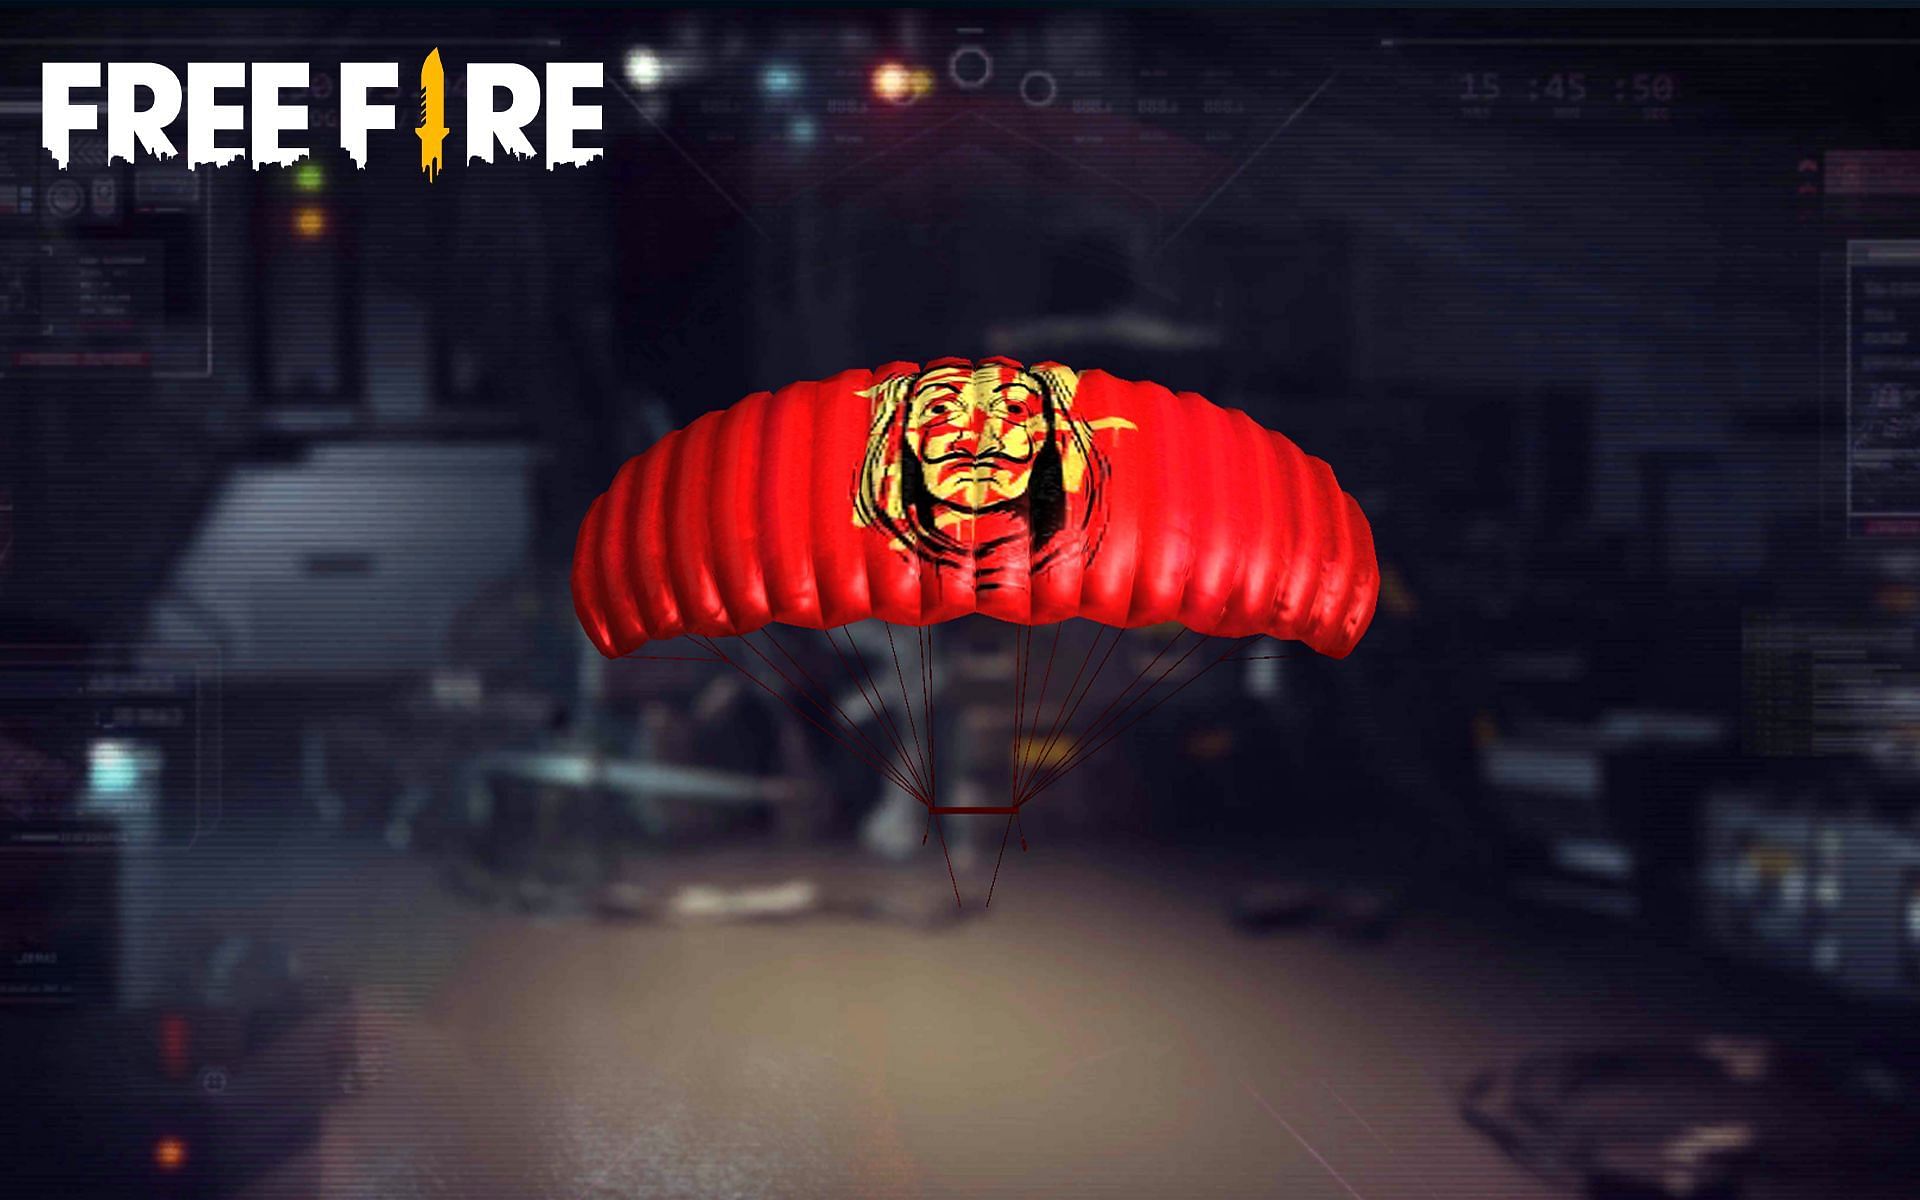 This parachute can be claimed for free on 11 December, i.e., in two days (Image via Free Fire)